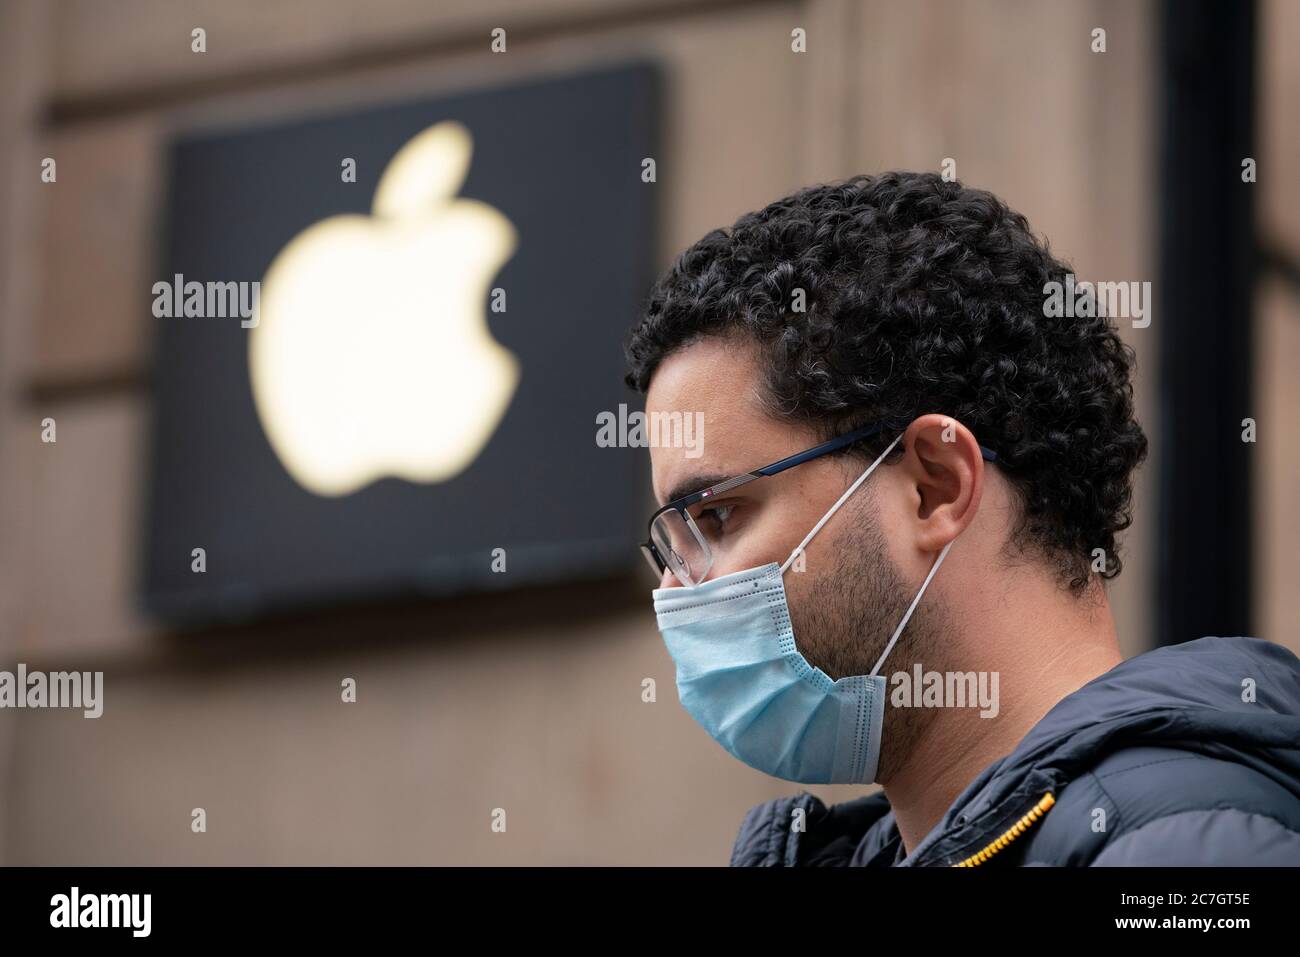 Glasgow, Scotland, UK. 17 July, 2020.  Images from Glasgow city centre as covid-19 restrictions are relaxed and  the public are out and about shopping and at work. Pictured; Man wearing facemark waiting in queue outside Apple shop. Iain Masterton/Alamy Live News Stock Photo